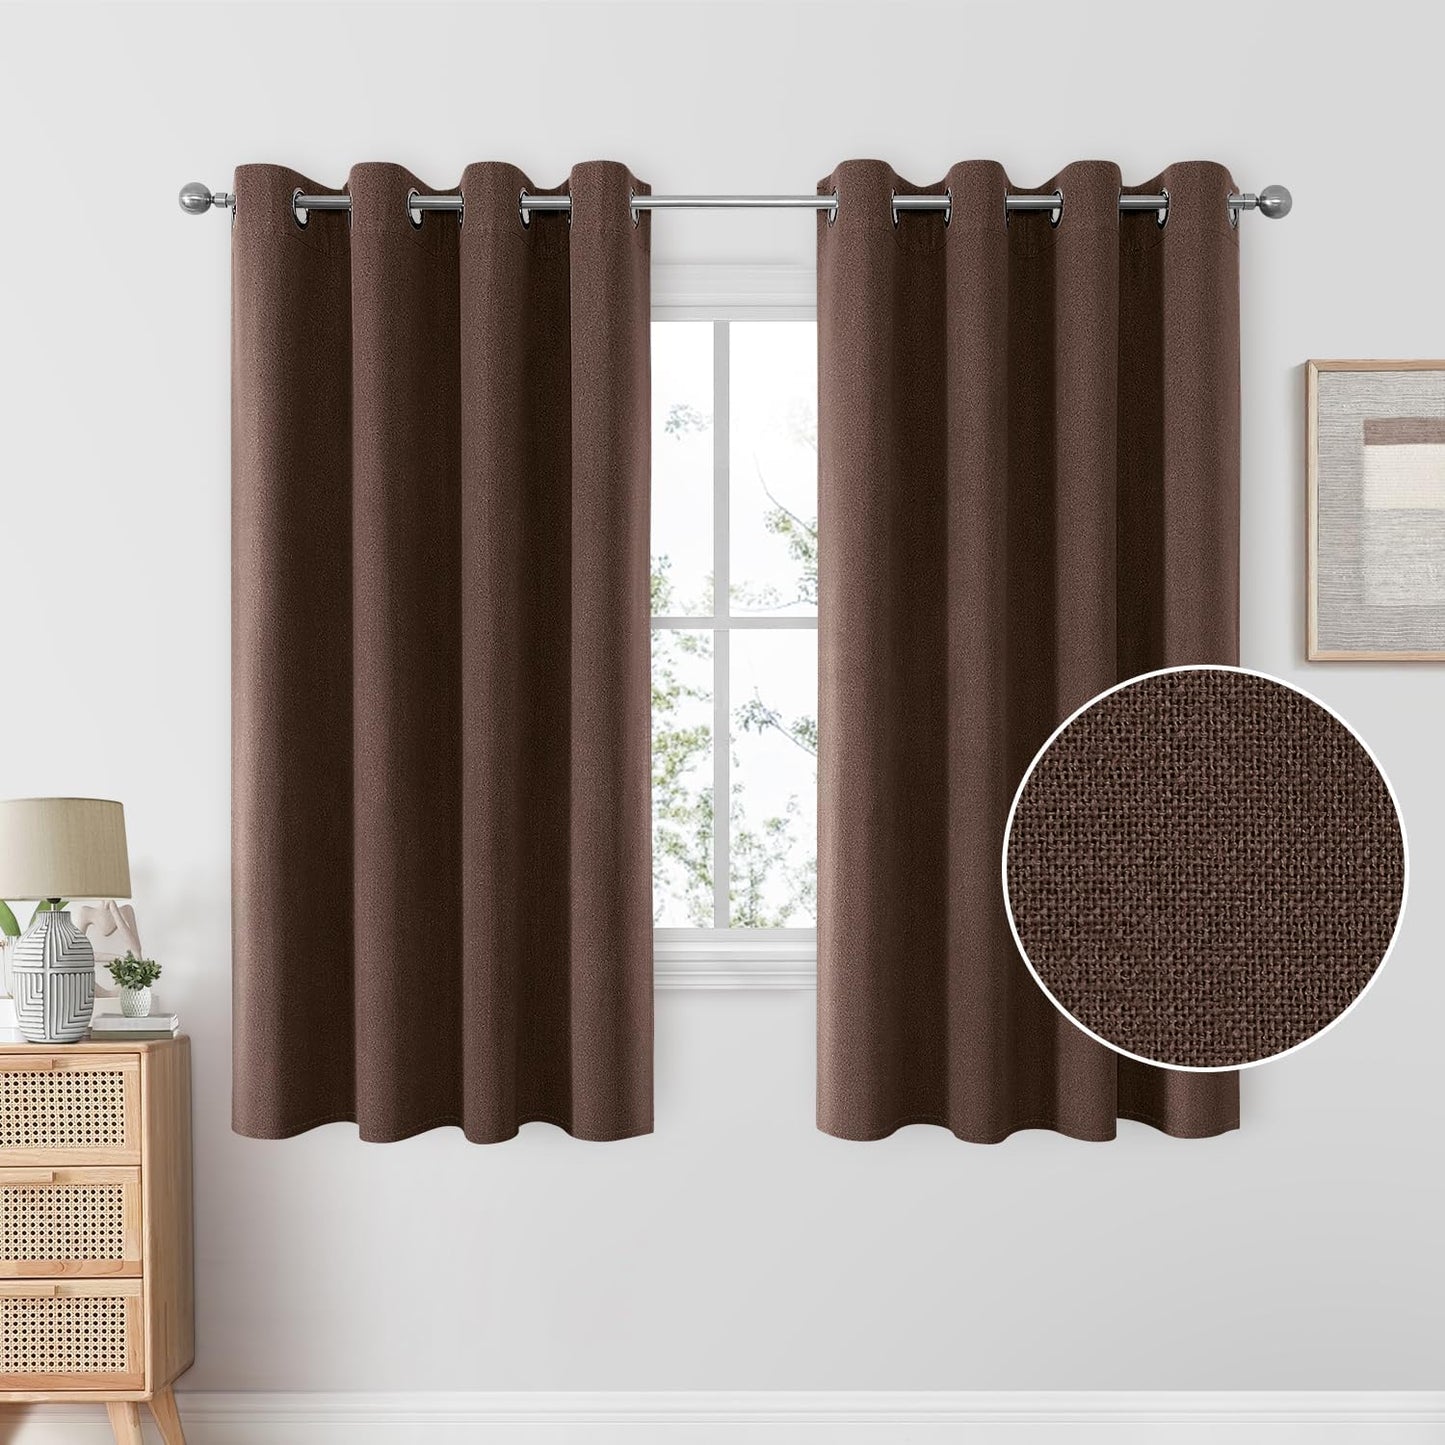 HOMEIDEAS 100% Blush Pink Linen Blackout Curtains for Bedroom, 52 X 84 Inch Room Darkening Curtains for Living, Faux Linen Thermal Insulated Full Black Out Grommet Window Curtains/Drapes  HOMEIDEAS Chocolate/Brown W52" X L63" 